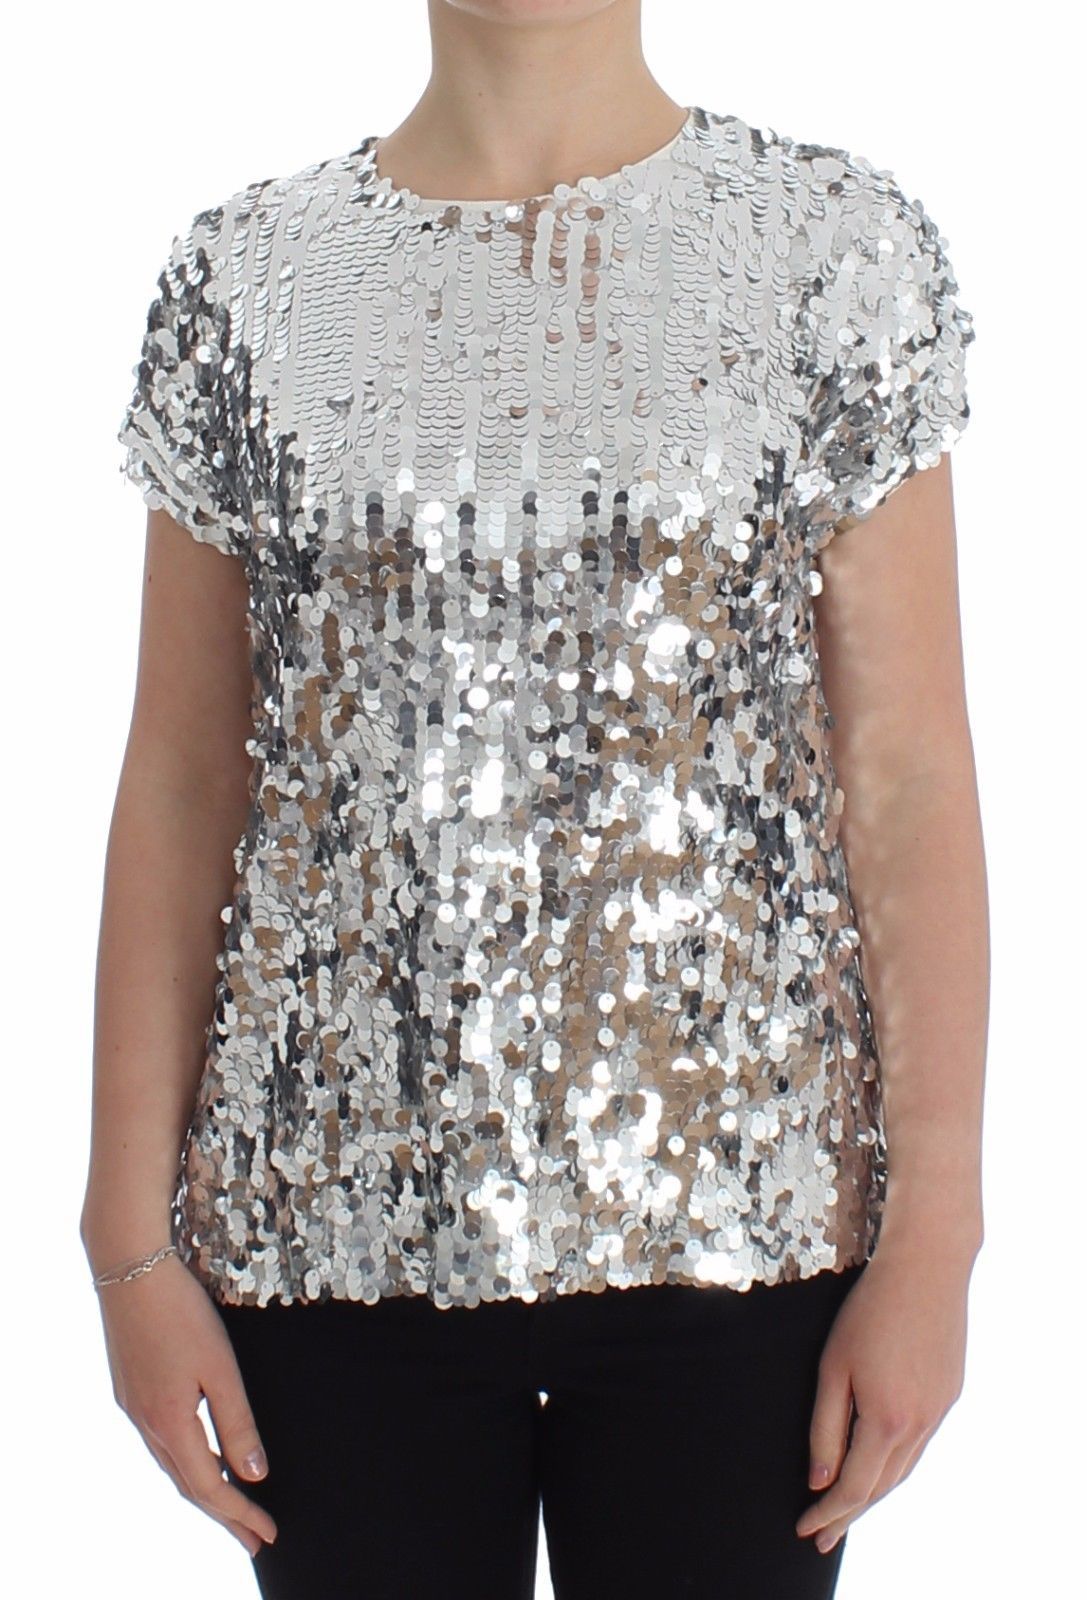 Dolce & Gabbana Women's Sequined T-Shirt White/Silver SIG13202 - IT44